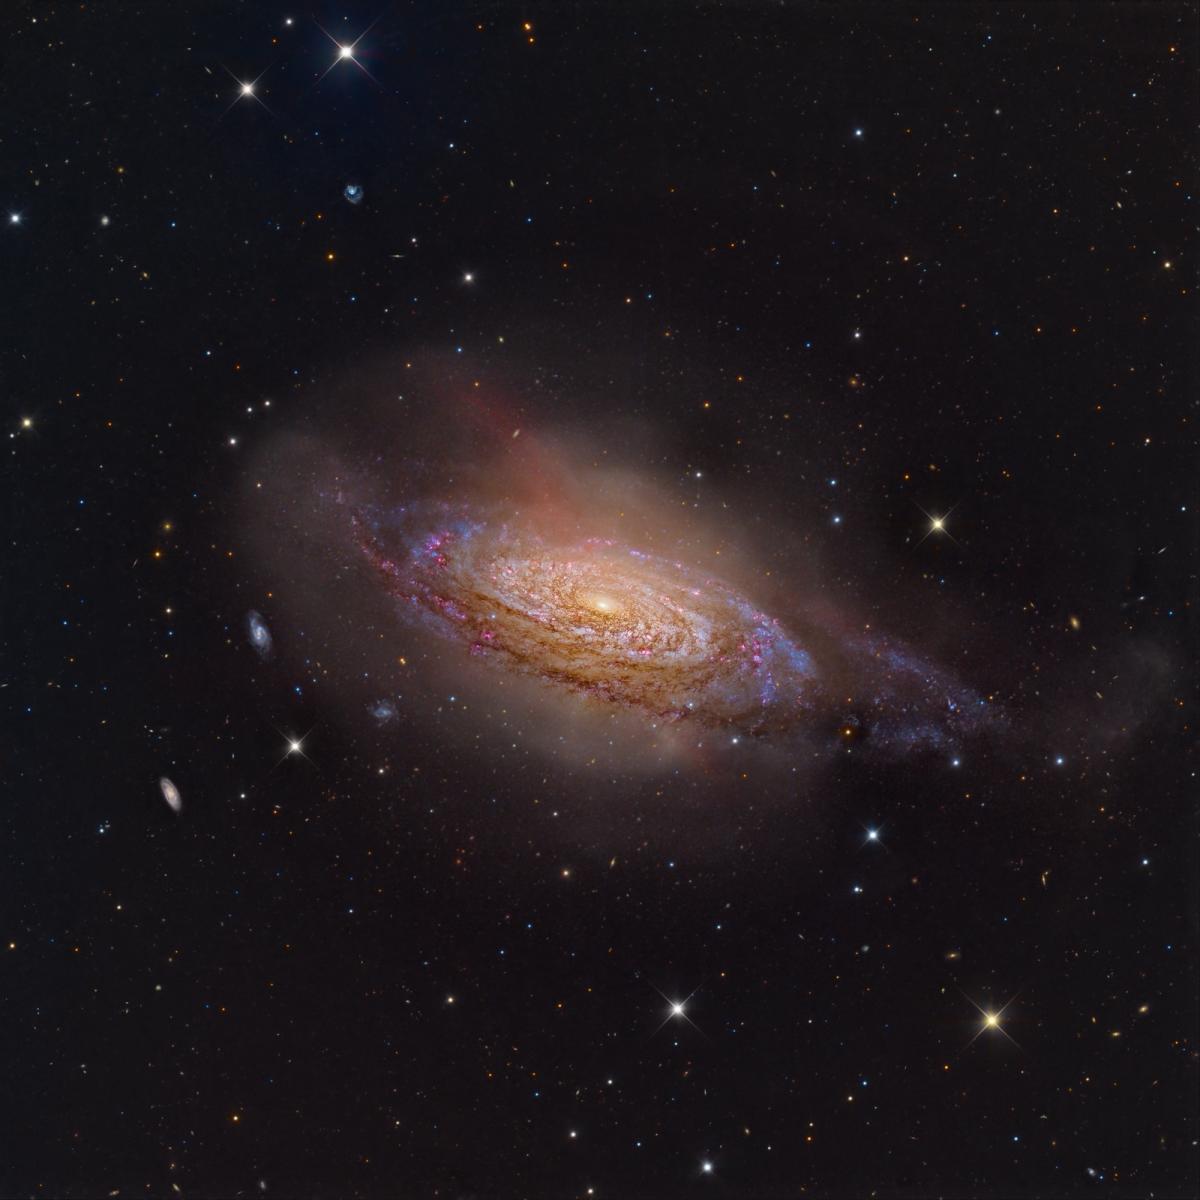 A dusty spiral galaxy hued in shades of yellow, purple and red floats in the darkness of space, surrounded by other, far distant galaxies and stars.